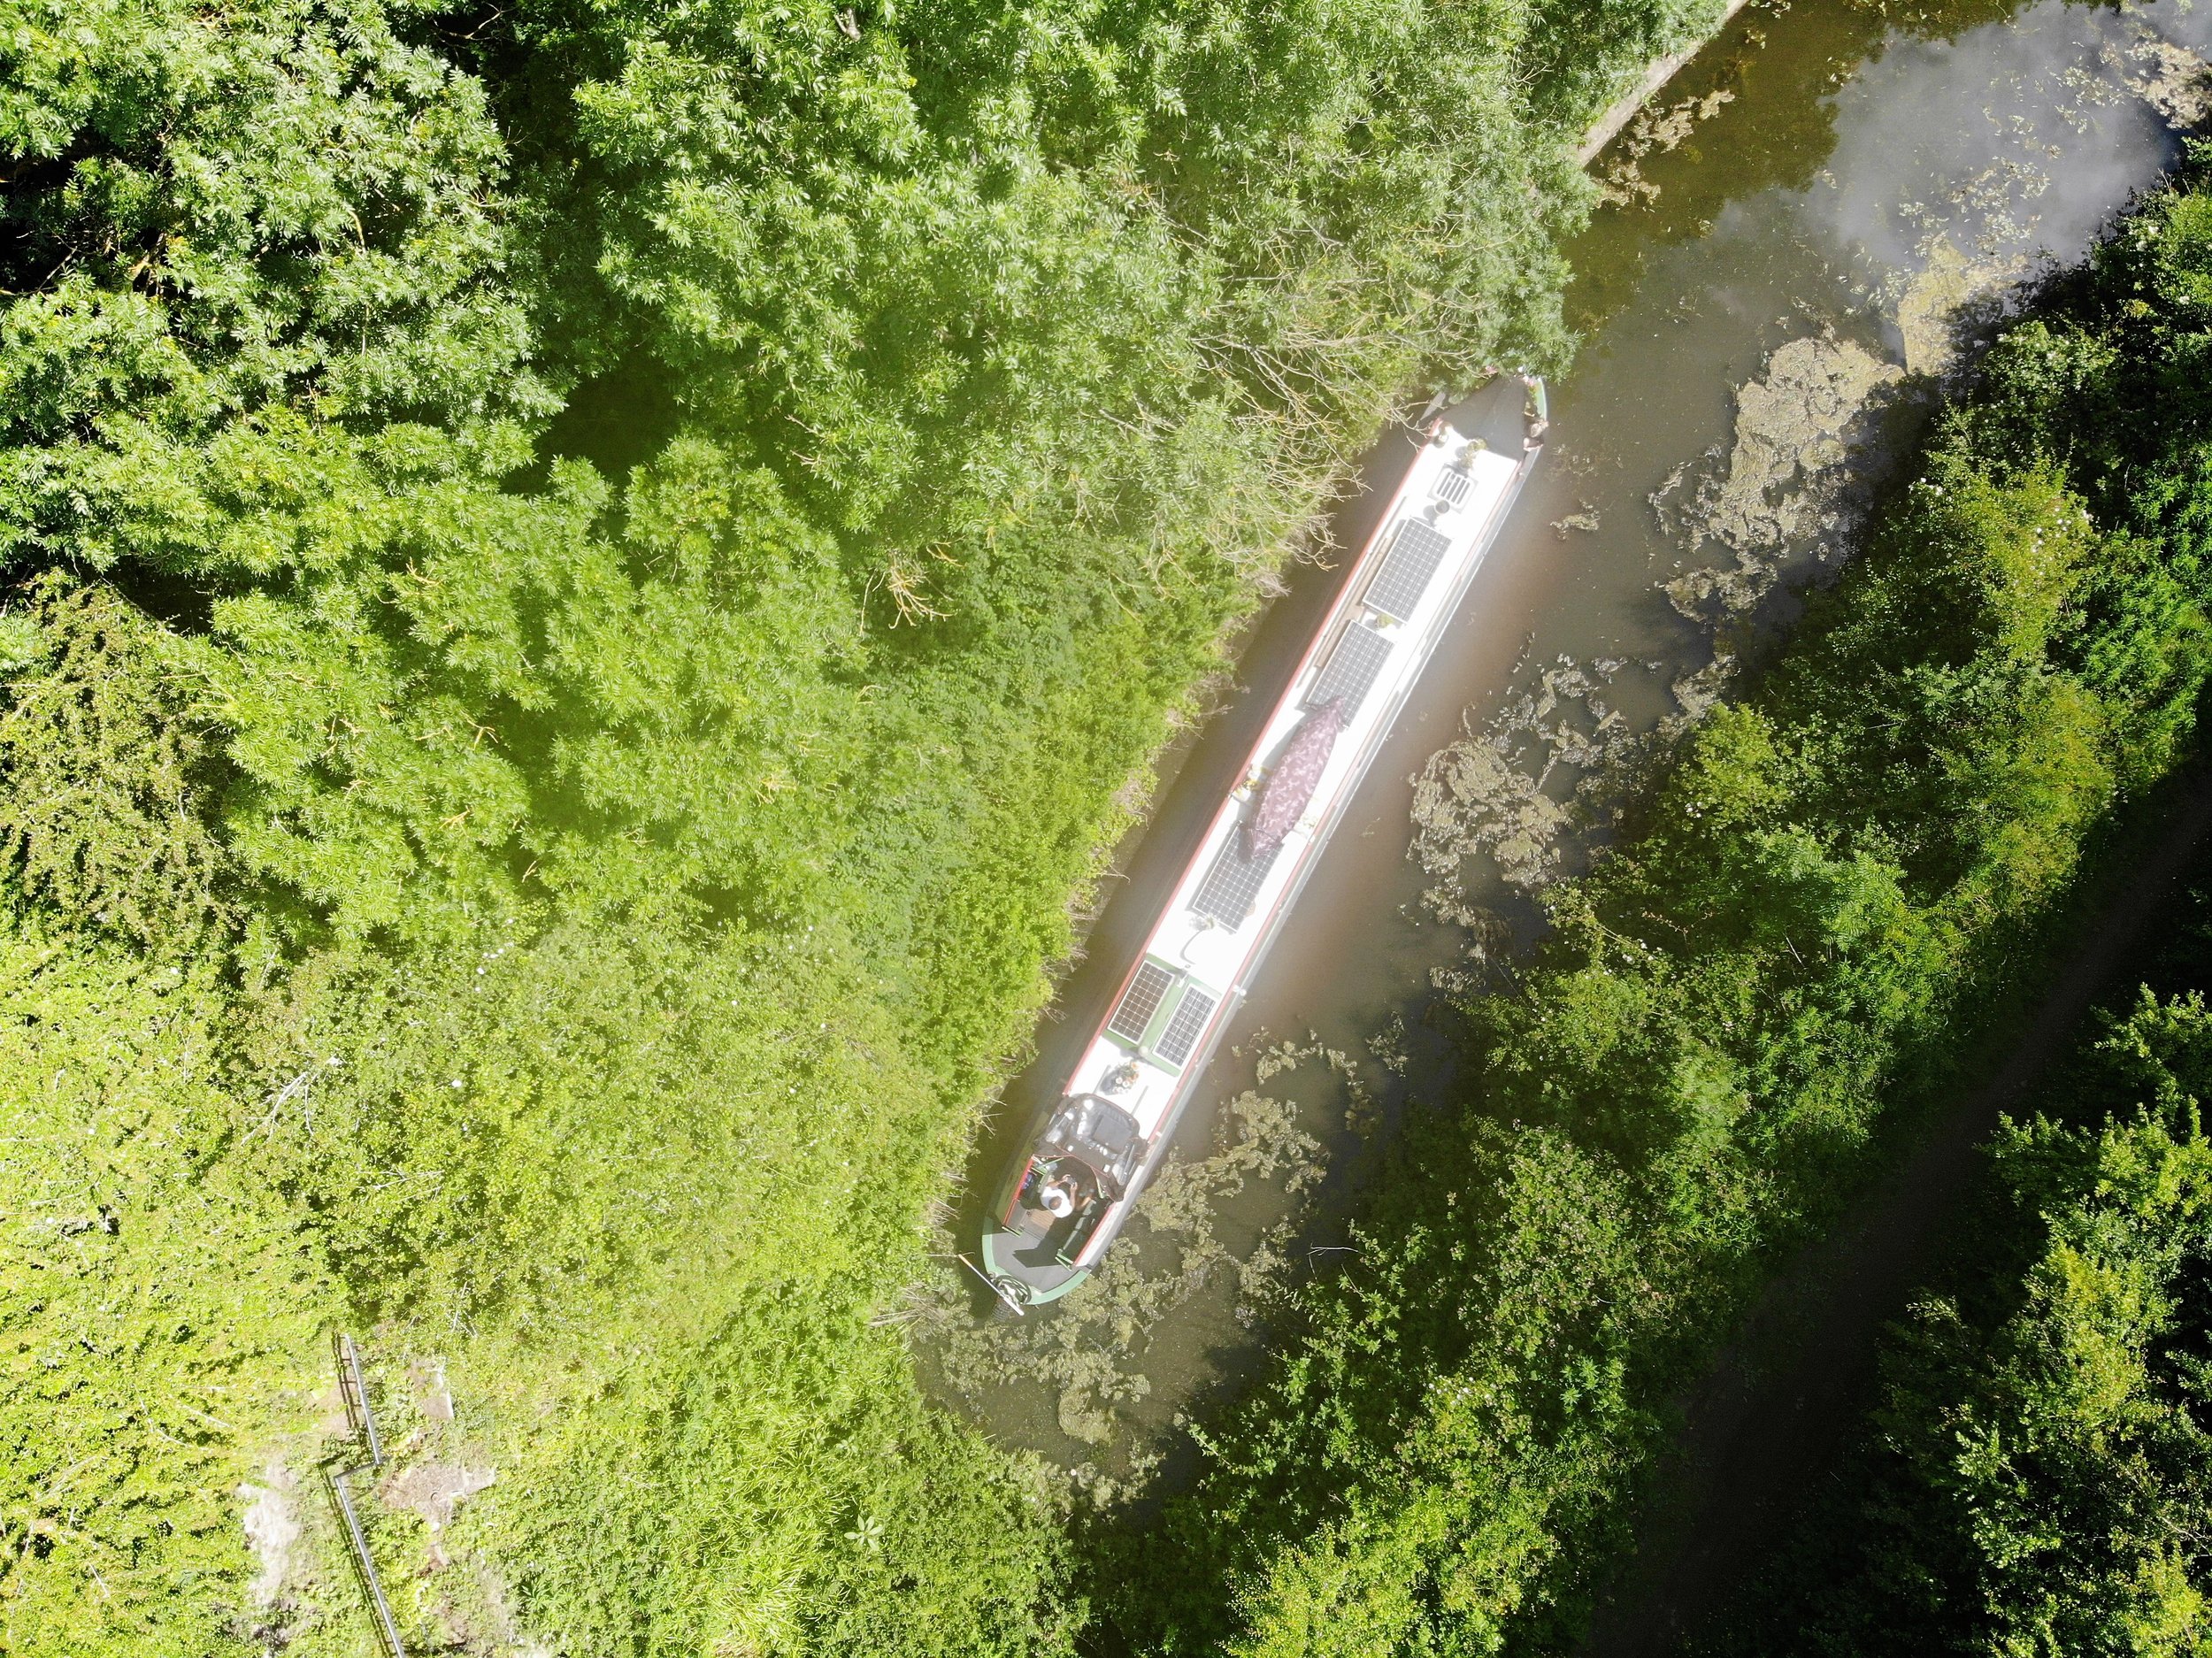  Aerial view of Narrowboat Hang loose at the end of the navigable Chesterfield canal 